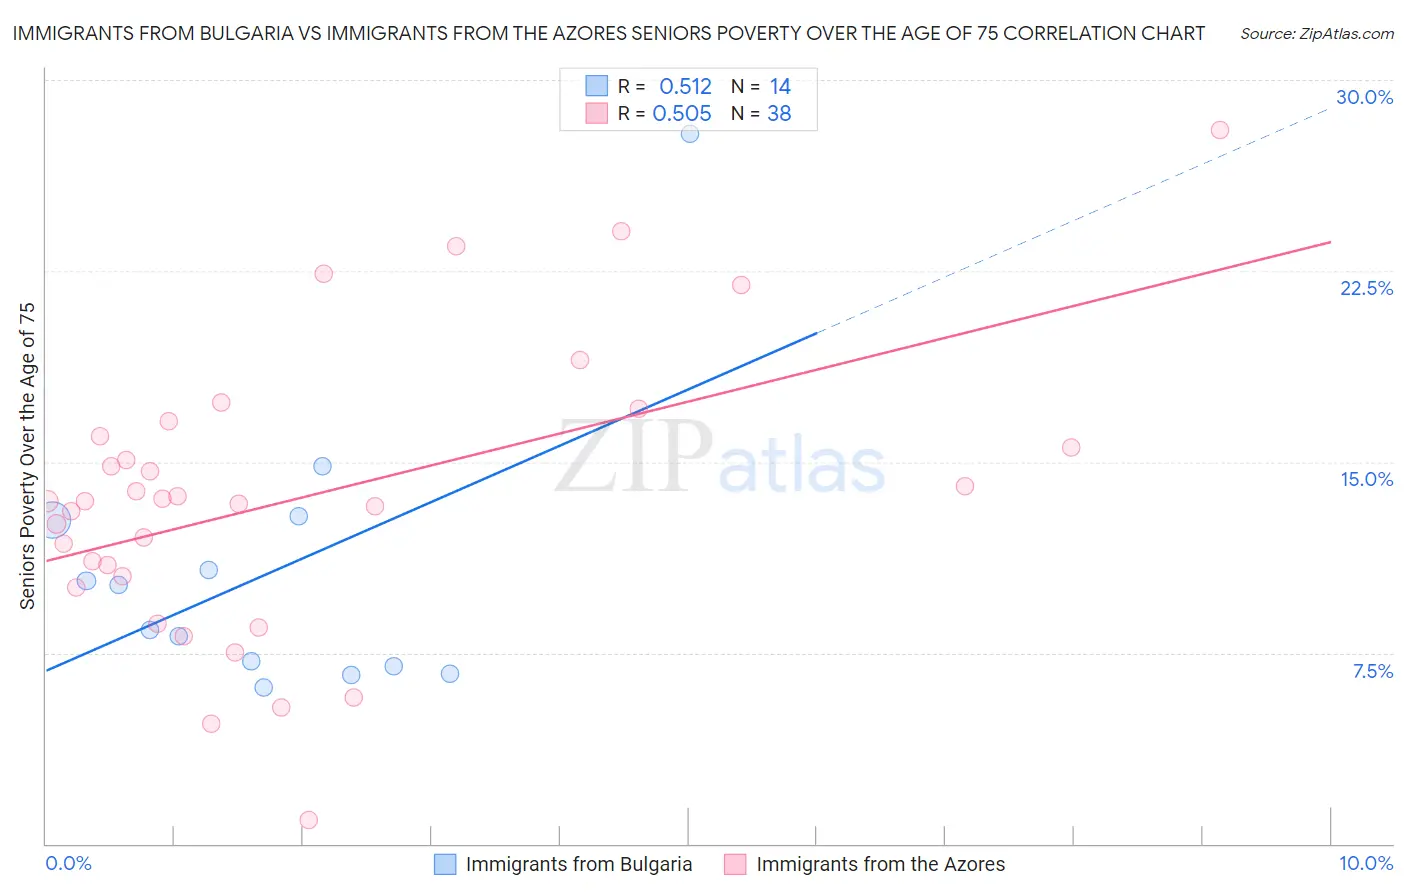 Immigrants from Bulgaria vs Immigrants from the Azores Seniors Poverty Over the Age of 75